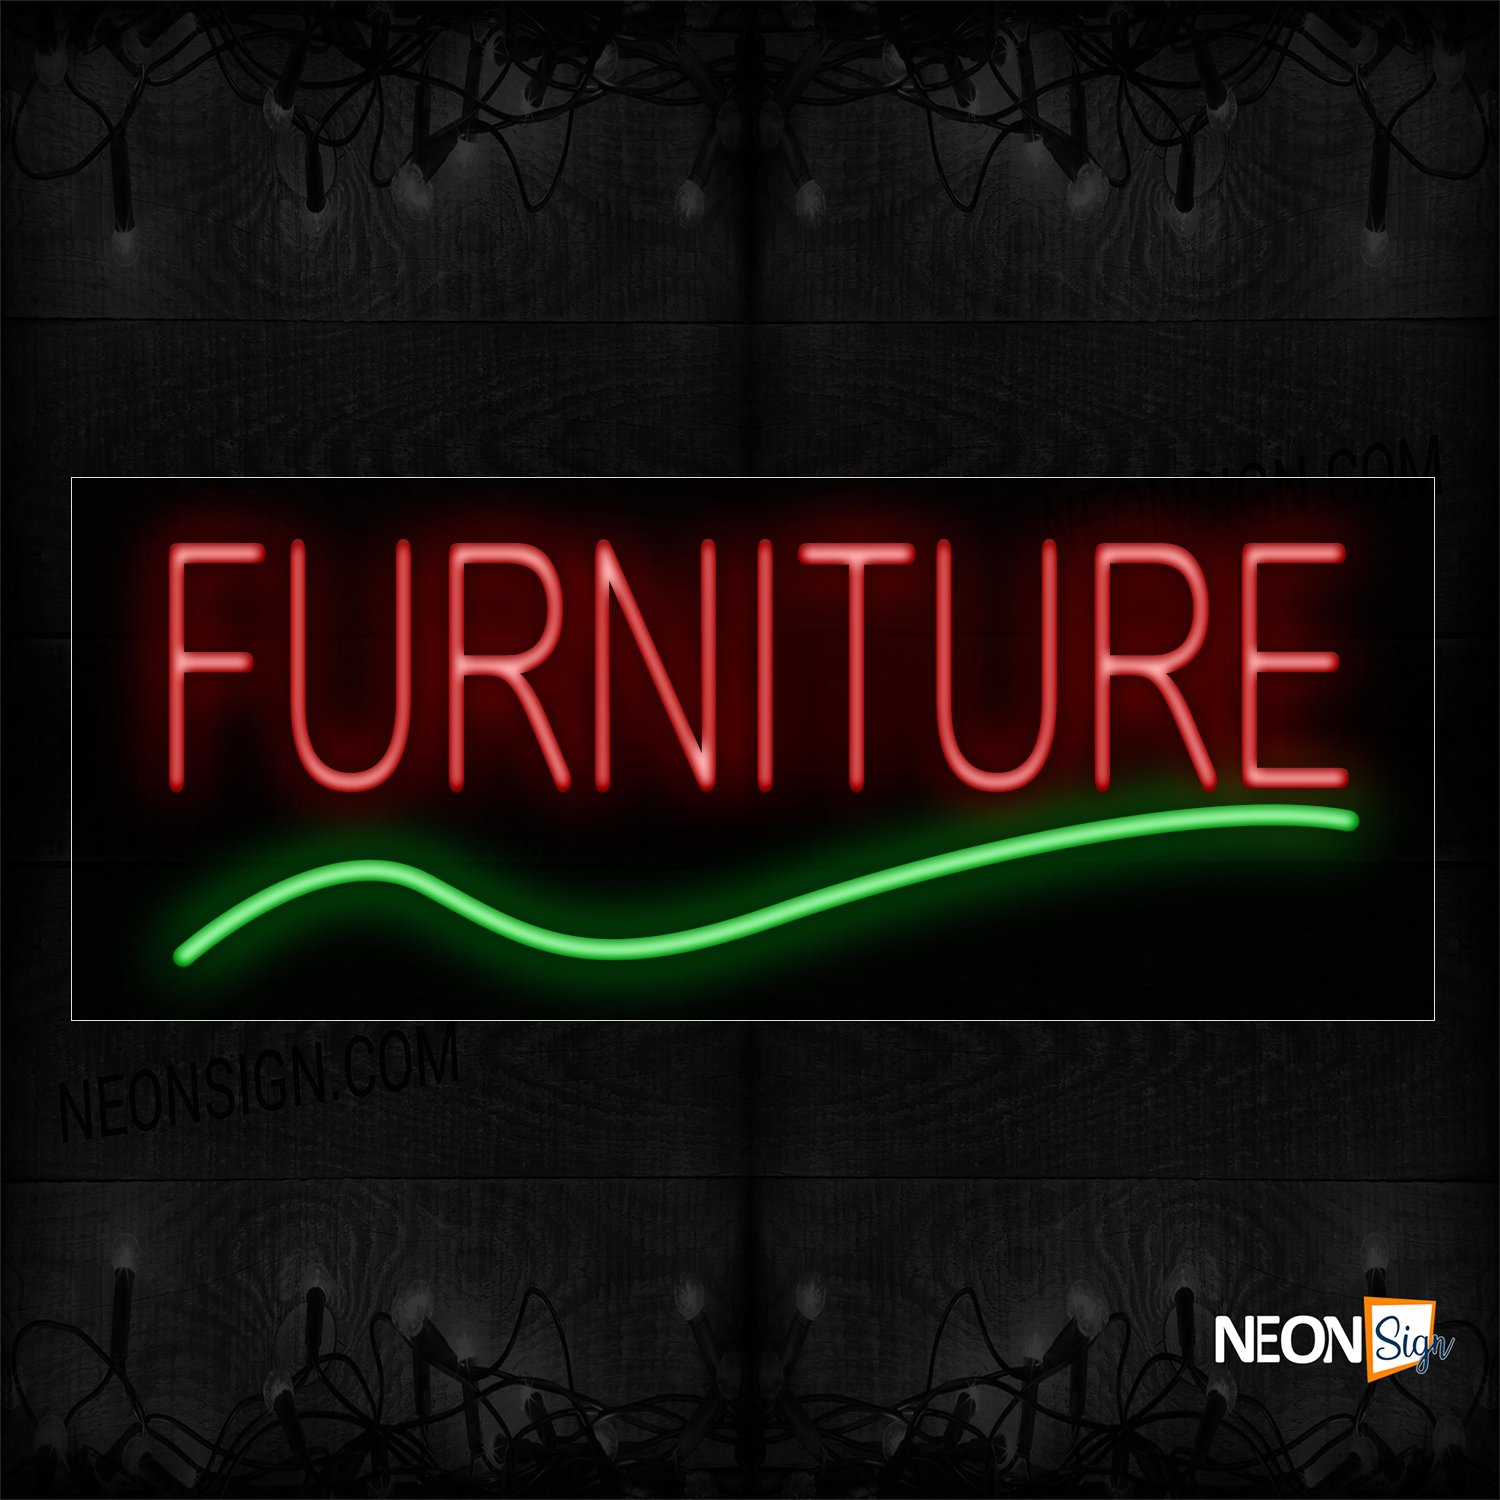 Image of 10062 Furniture In Red With Green Line Neon Sign_13x32 Black Backing